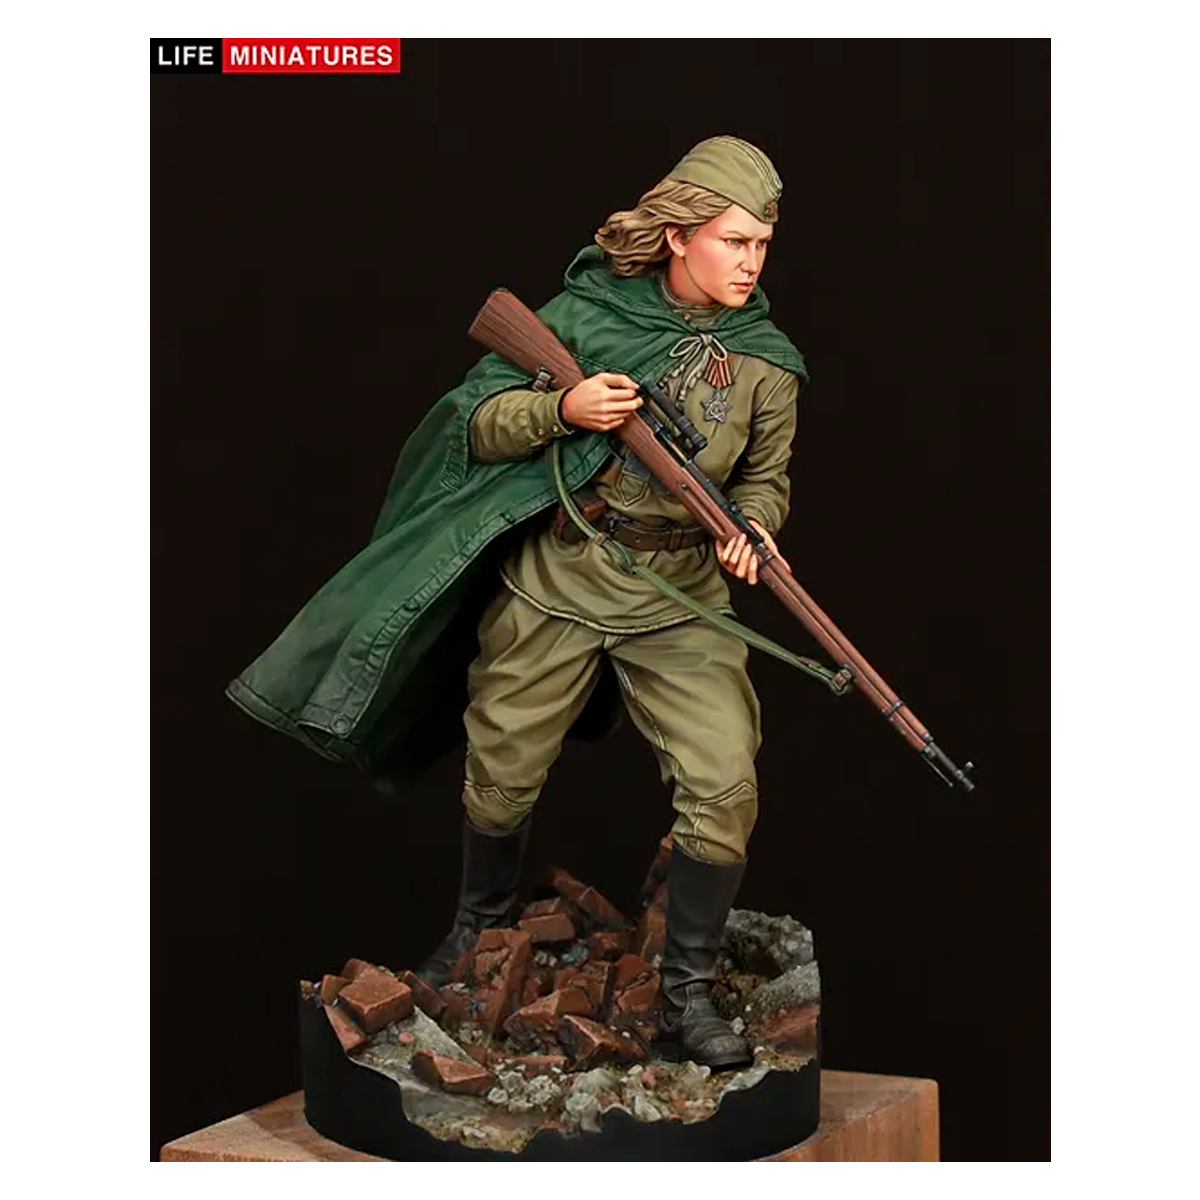 Life Miniatures – WW2 RED ARMY FEMALE SNIPER (1/16 scale)